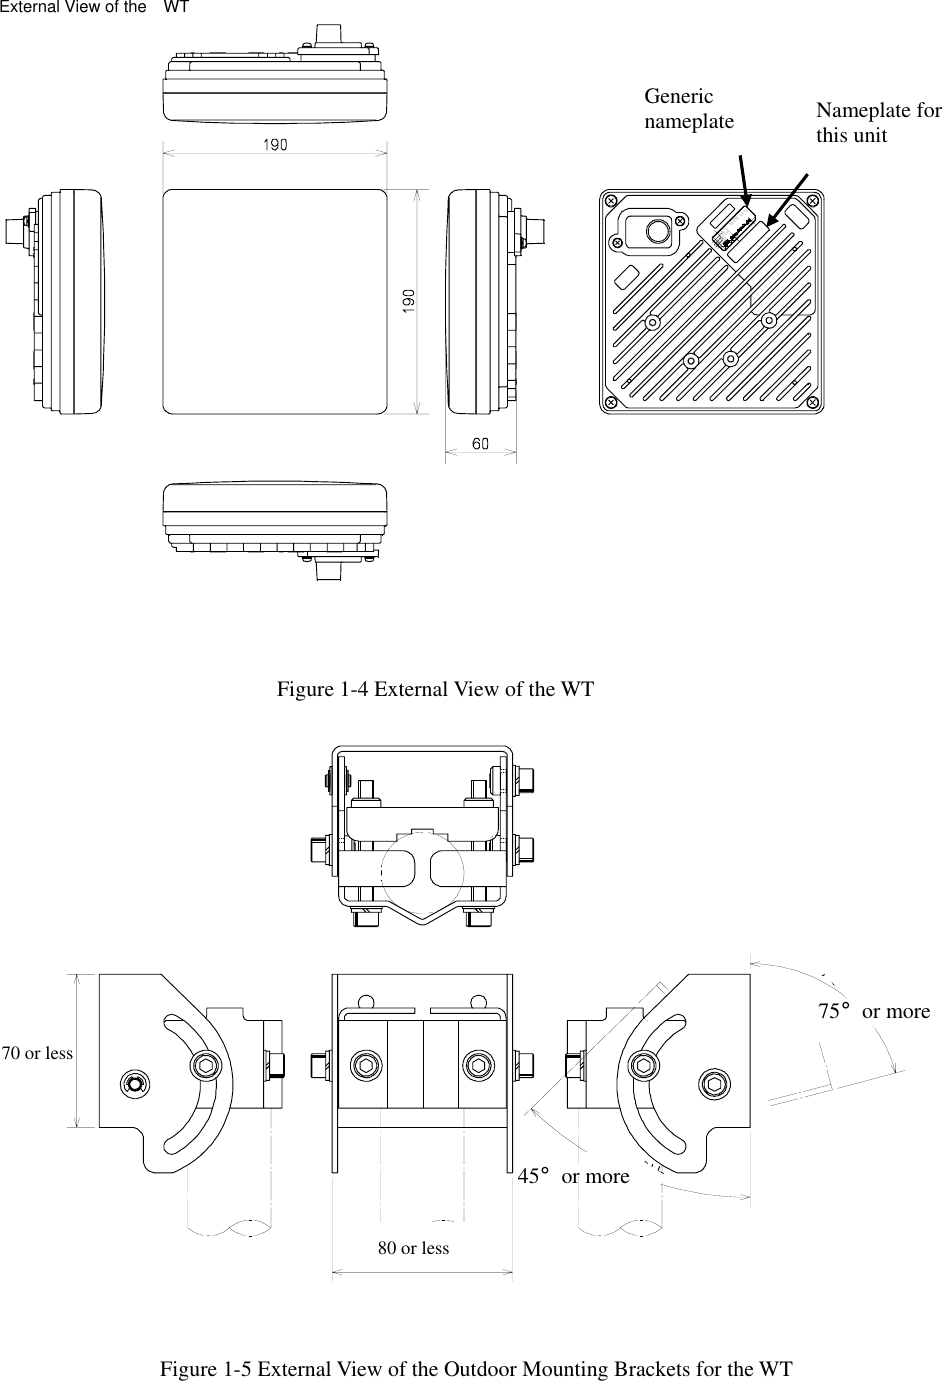 Figure 1-4 External View of the WT   ＤＣ ２４Ｖ ０．７ＡＳＥＲ．ＮＯ．ＩＮＰＵＴ：ＤＡＴＥ ：ＴＹＰＥＷ−ＷＴ＜ＥＬ ＞ＭＡＤＥ ＩＮＪＡＰＡＮGeneric nameplate  Nameplate for this unit External View of the    WT Figure 1-5 External View of the Outdoor Mounting Brackets for the WT   80 or less 45°or more 70 or less 75°or more 